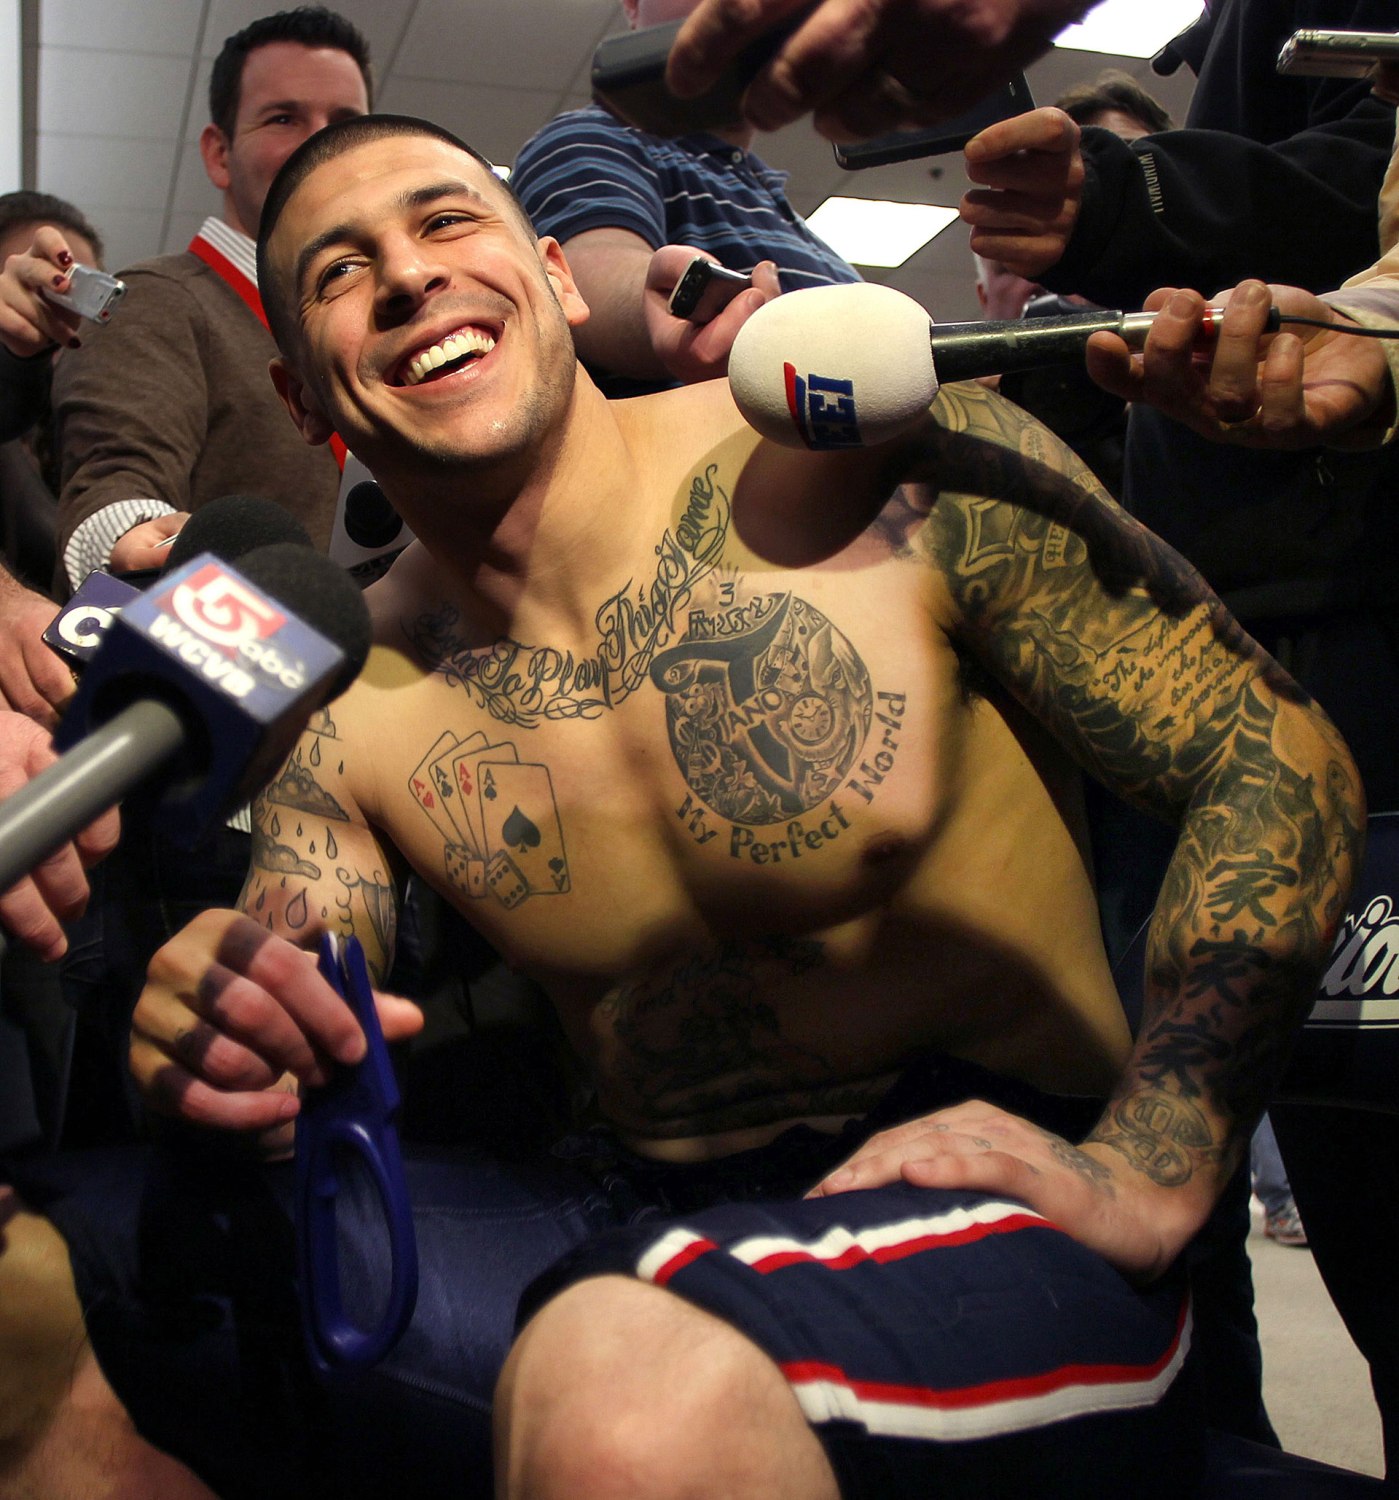 Aaron Hernandez And The Murder Of Odin Lloyd – The True Story Behind The Crime